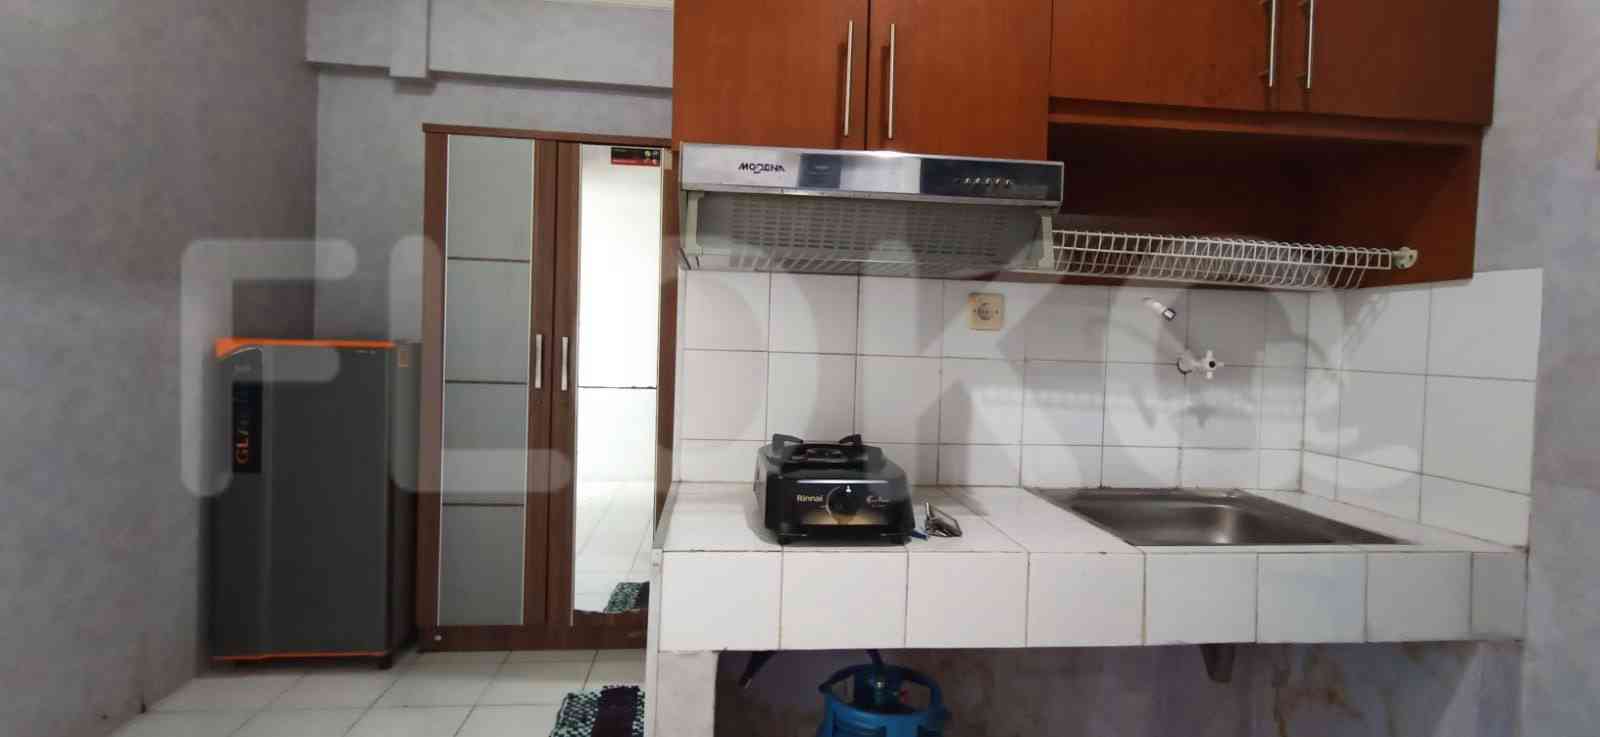 1 Bedroom on 7th Floor for Rent in Sentra Timur Residence - fca1ac 4